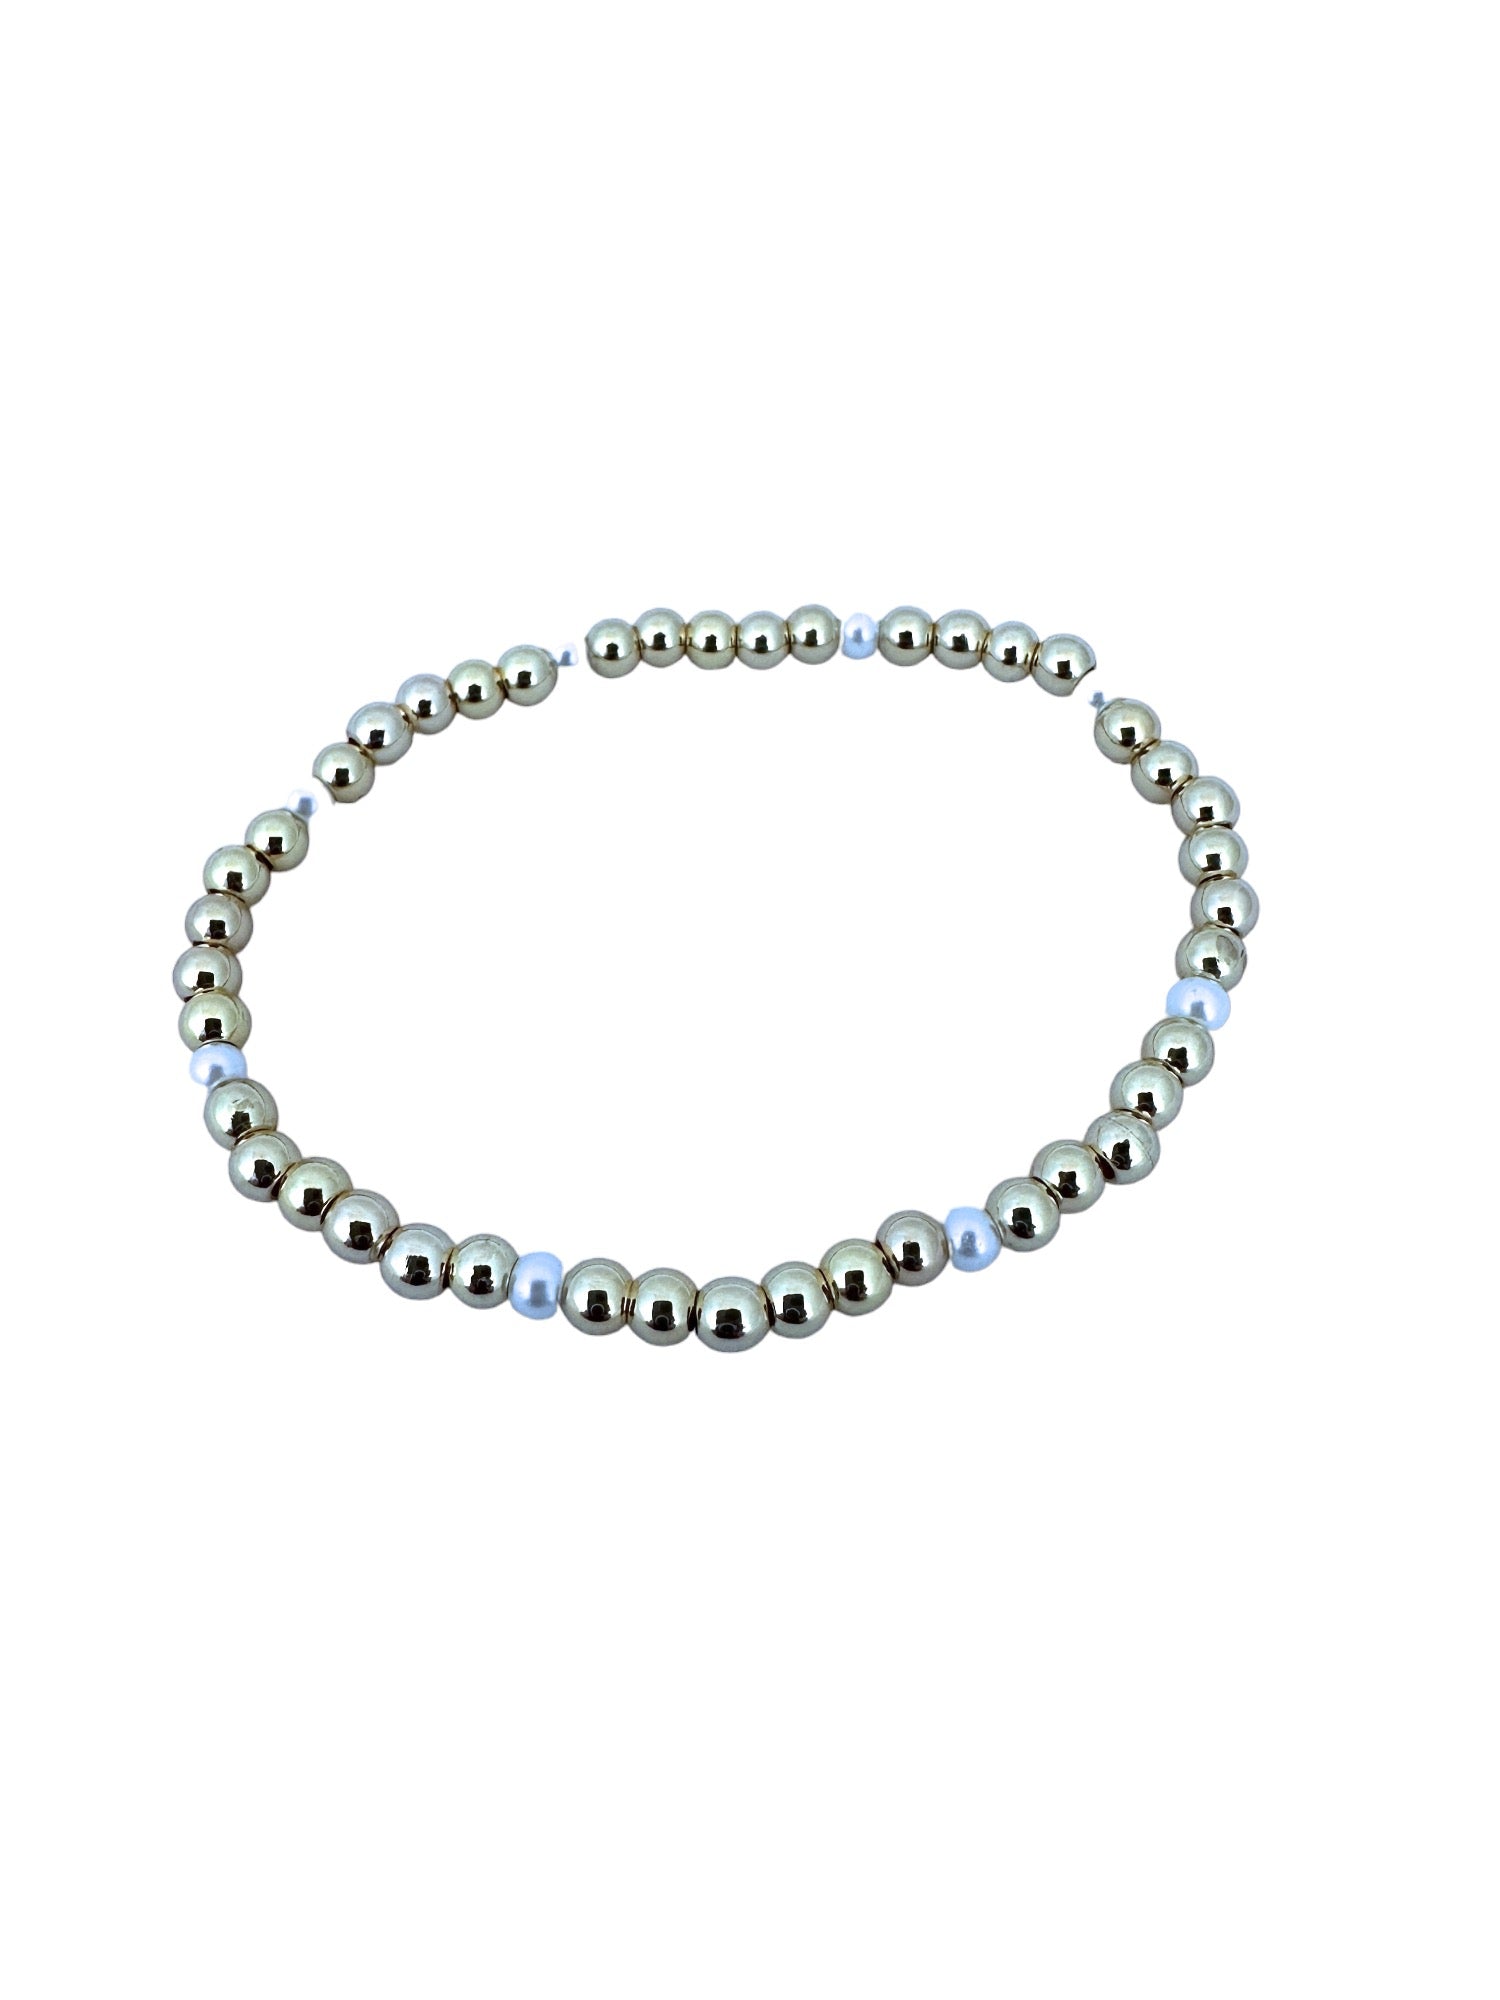 4mm Gold or Silver Ball Stretch Bracelet with Scattered Pearl Detail